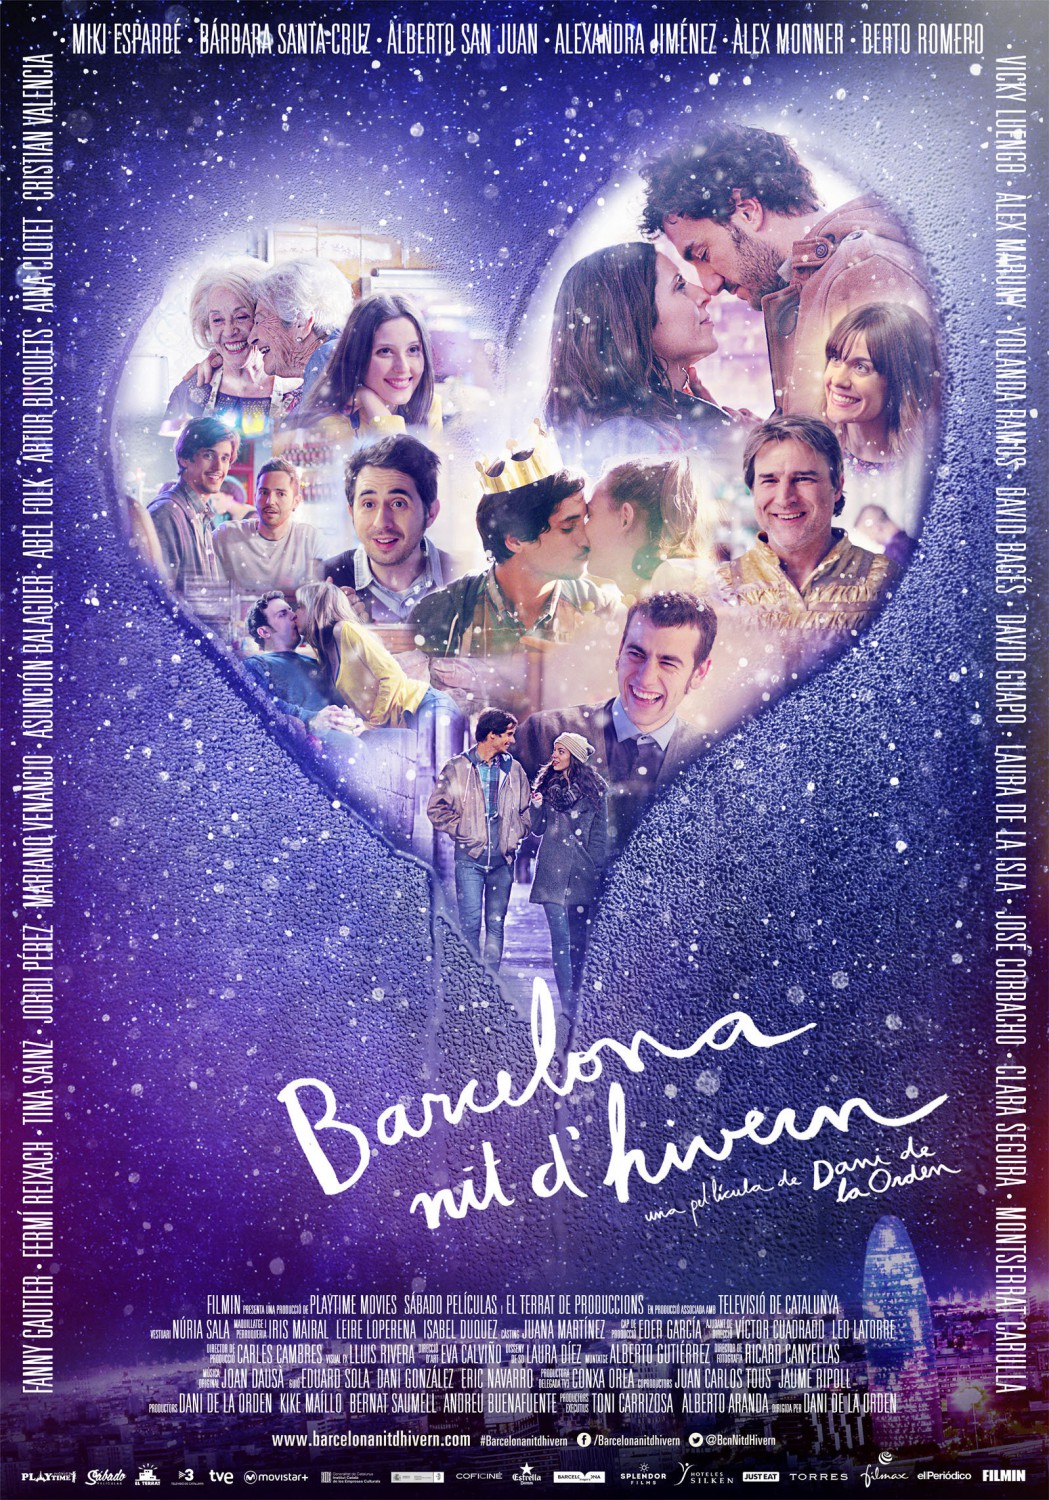 Extra Large Movie Poster Image for Barcelona, nit d'hivern 